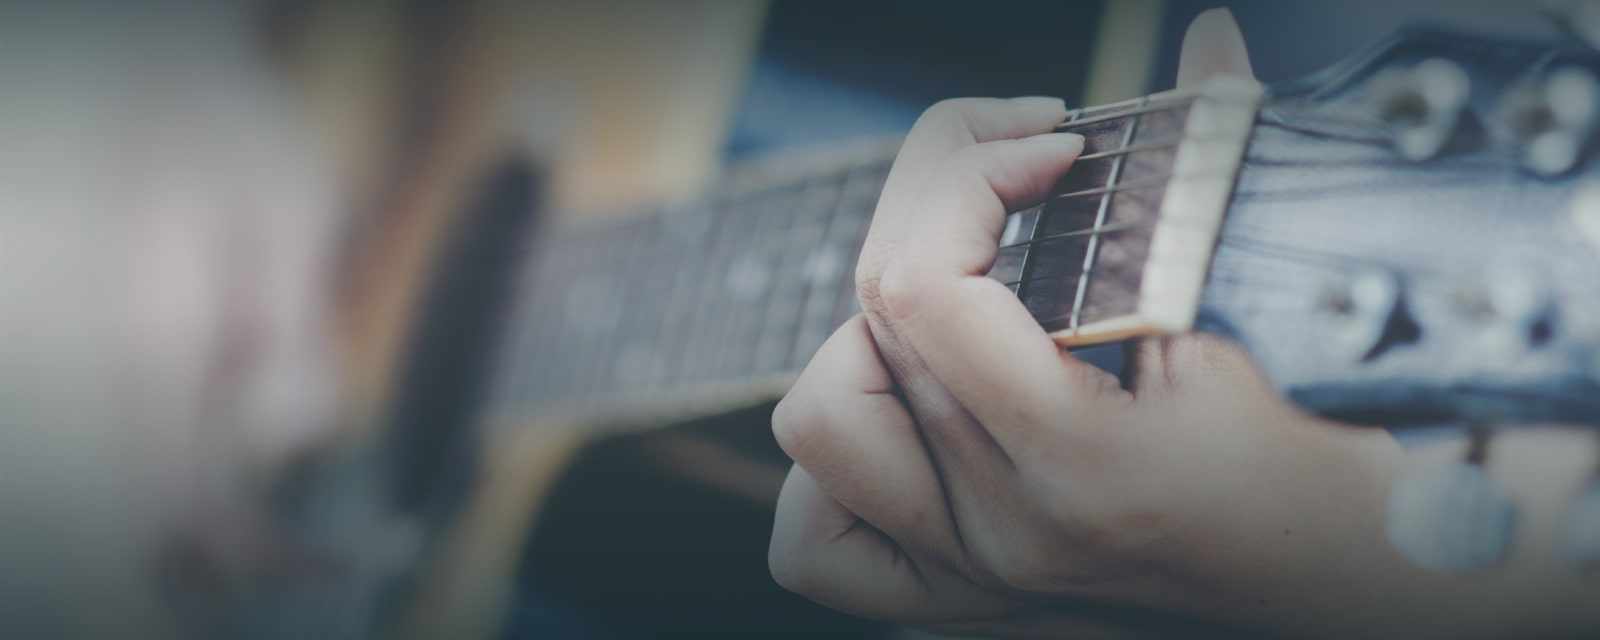 Introduction to fingerstyle guitar